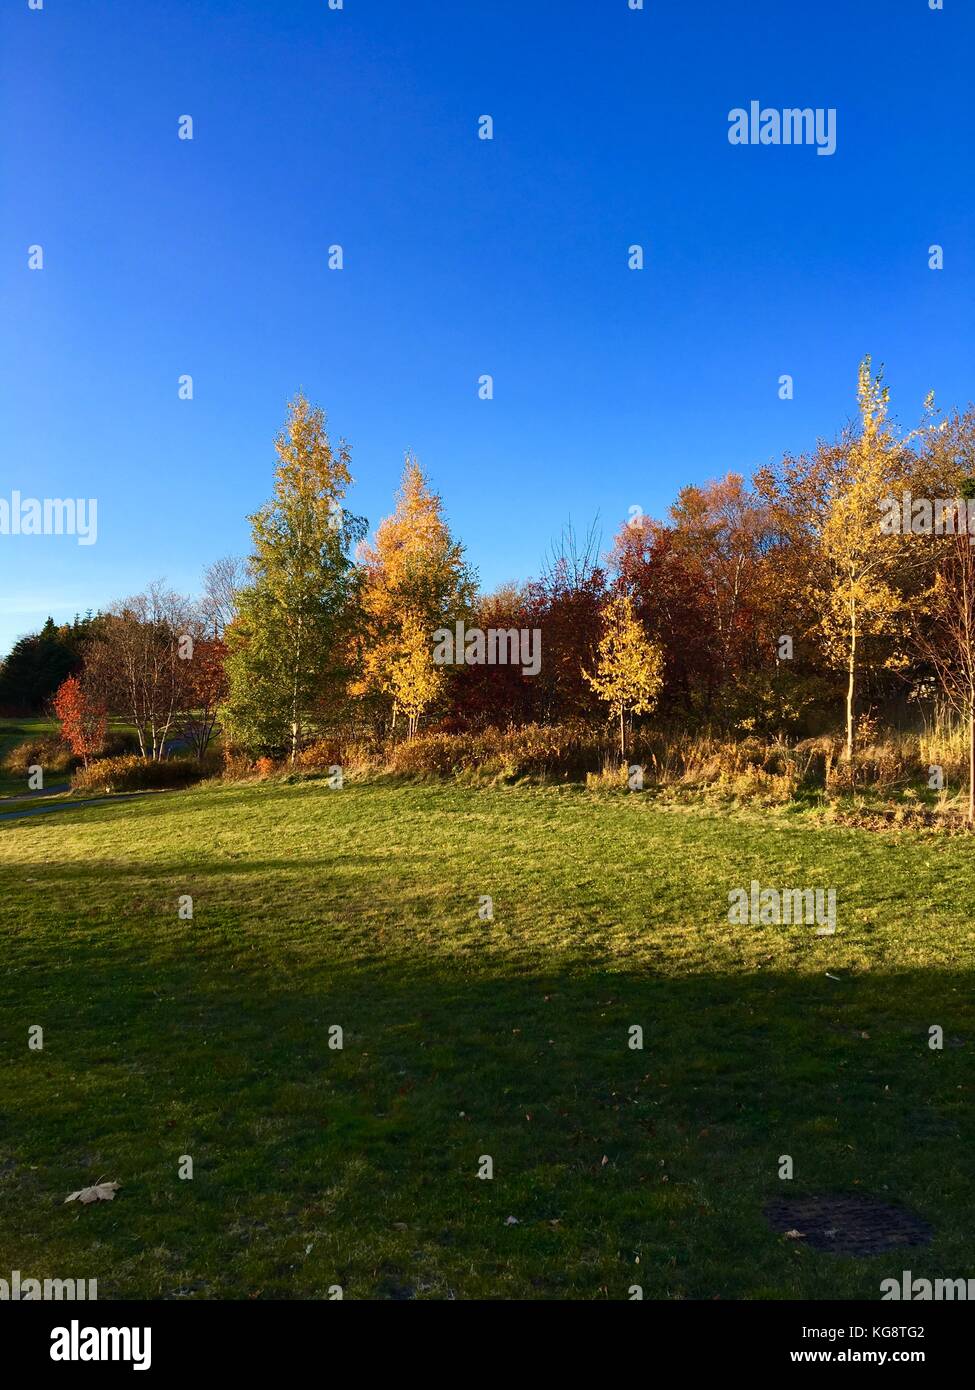 A field of green grass rimmed by trees whose leaves have turned to fall colours. Sunny day. Blue sky. Stock Photo